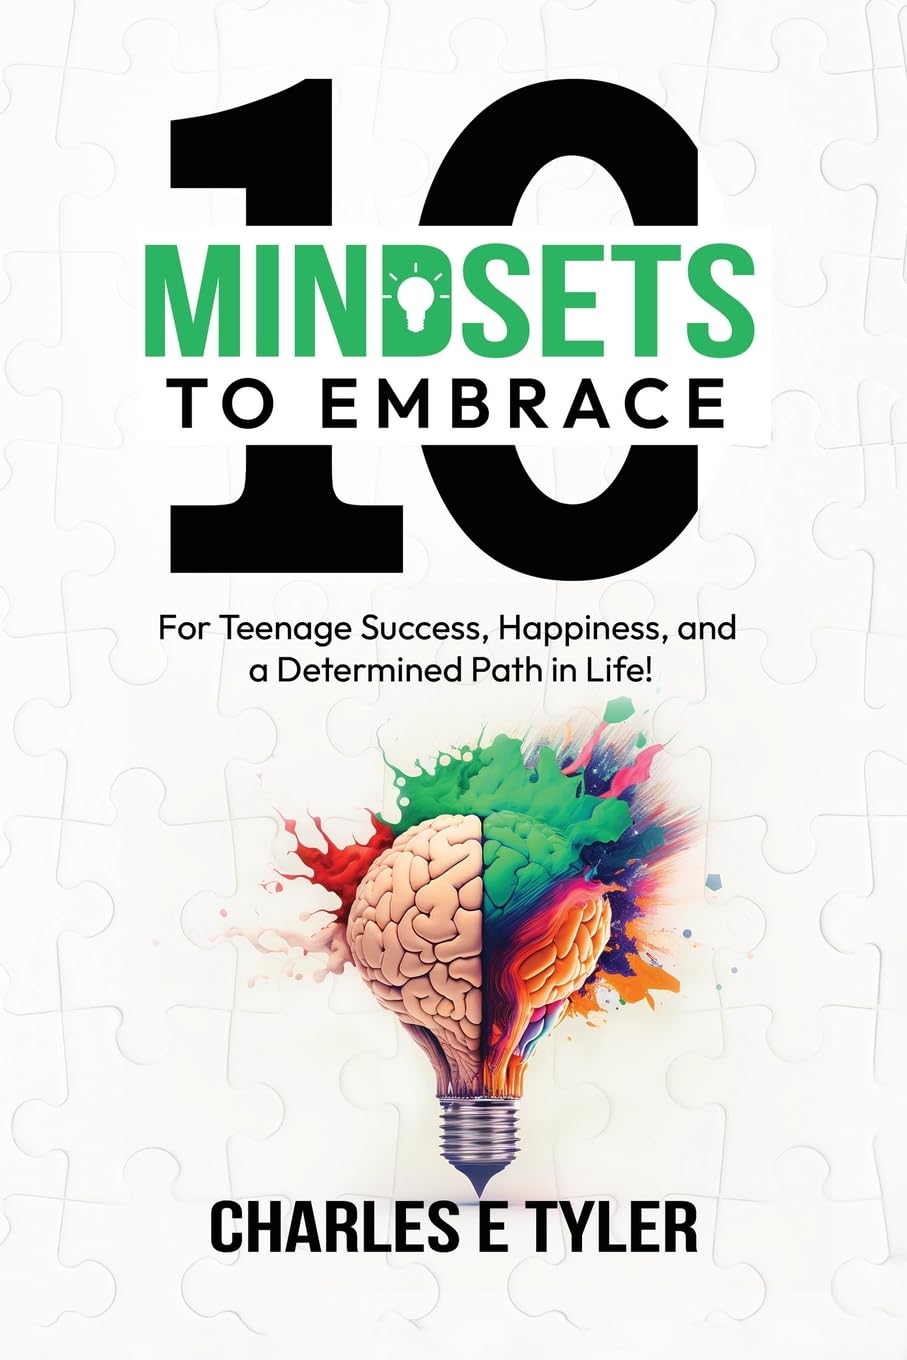 New Book Guides Teens Towards Success: 10 Mindsets to Embrace For Teenage Success, Happiness, and A Determined Path in Life